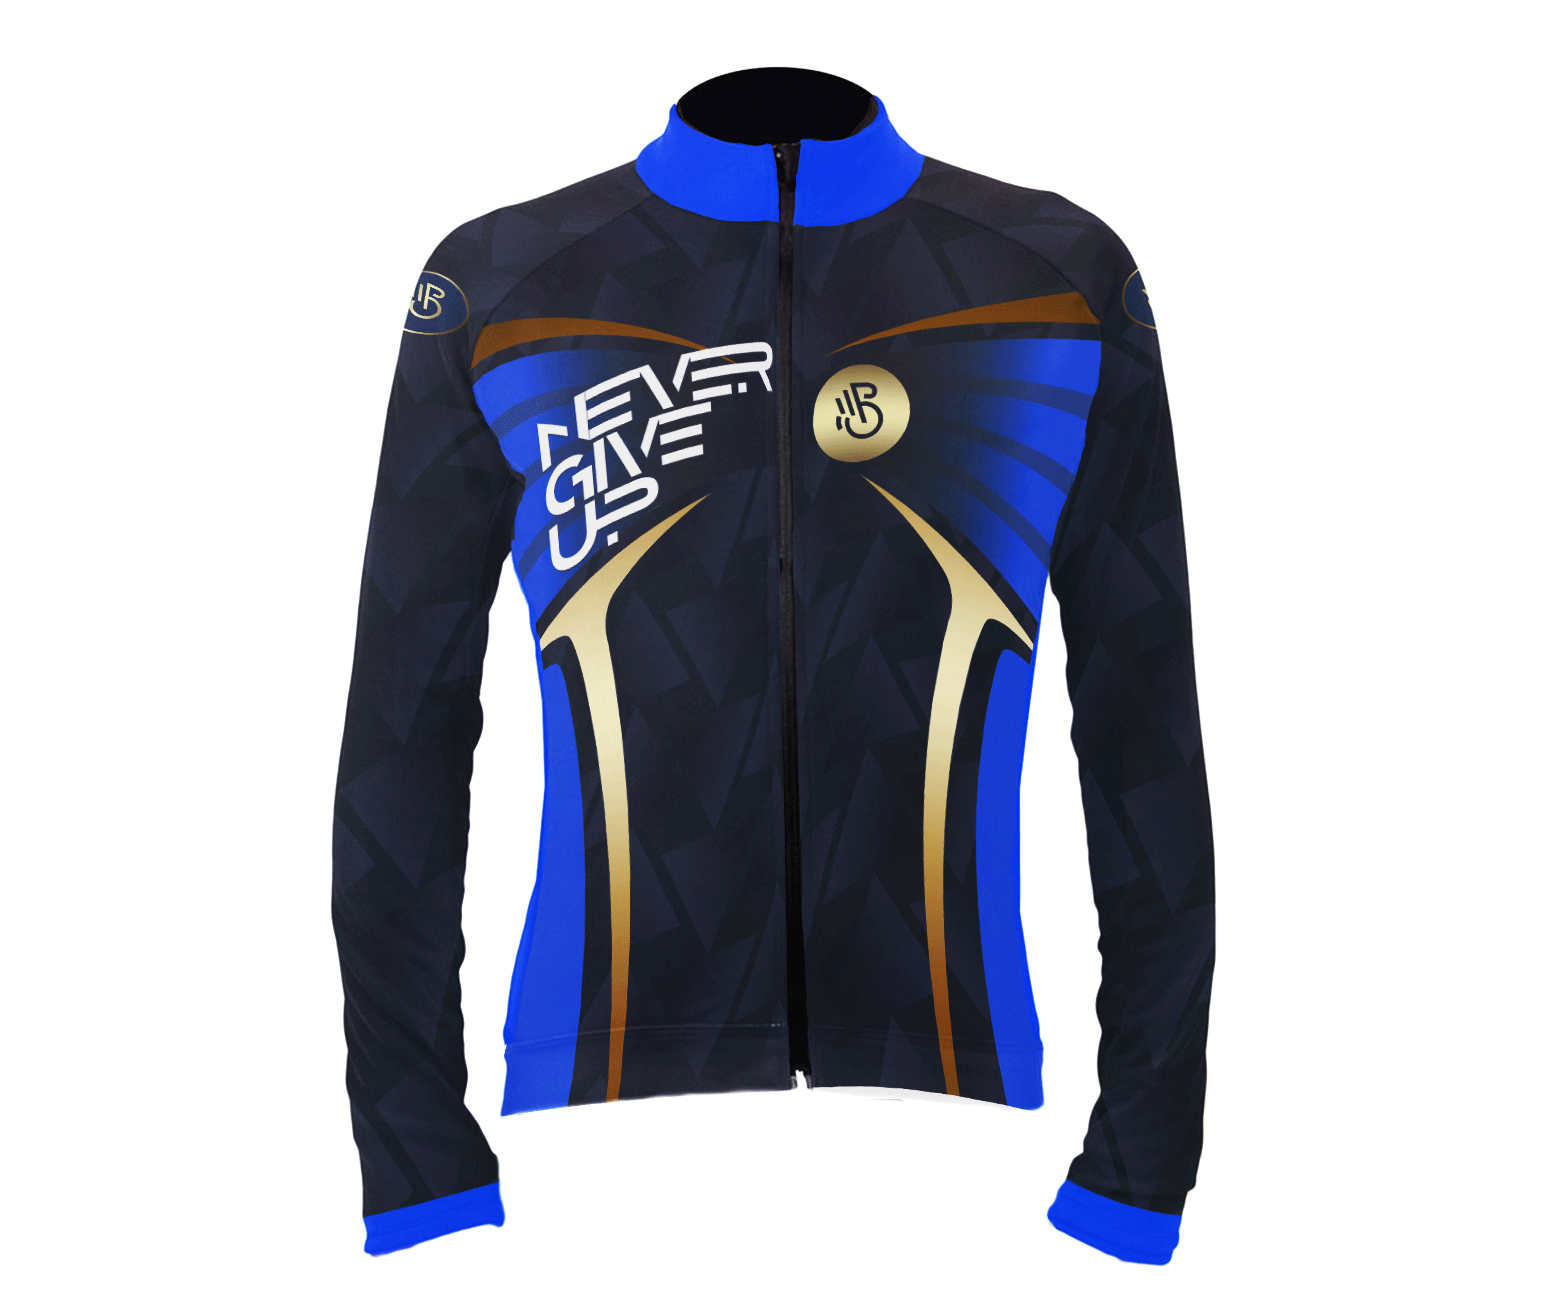 Cycling windbreaker NEVER GIVE UP image 1